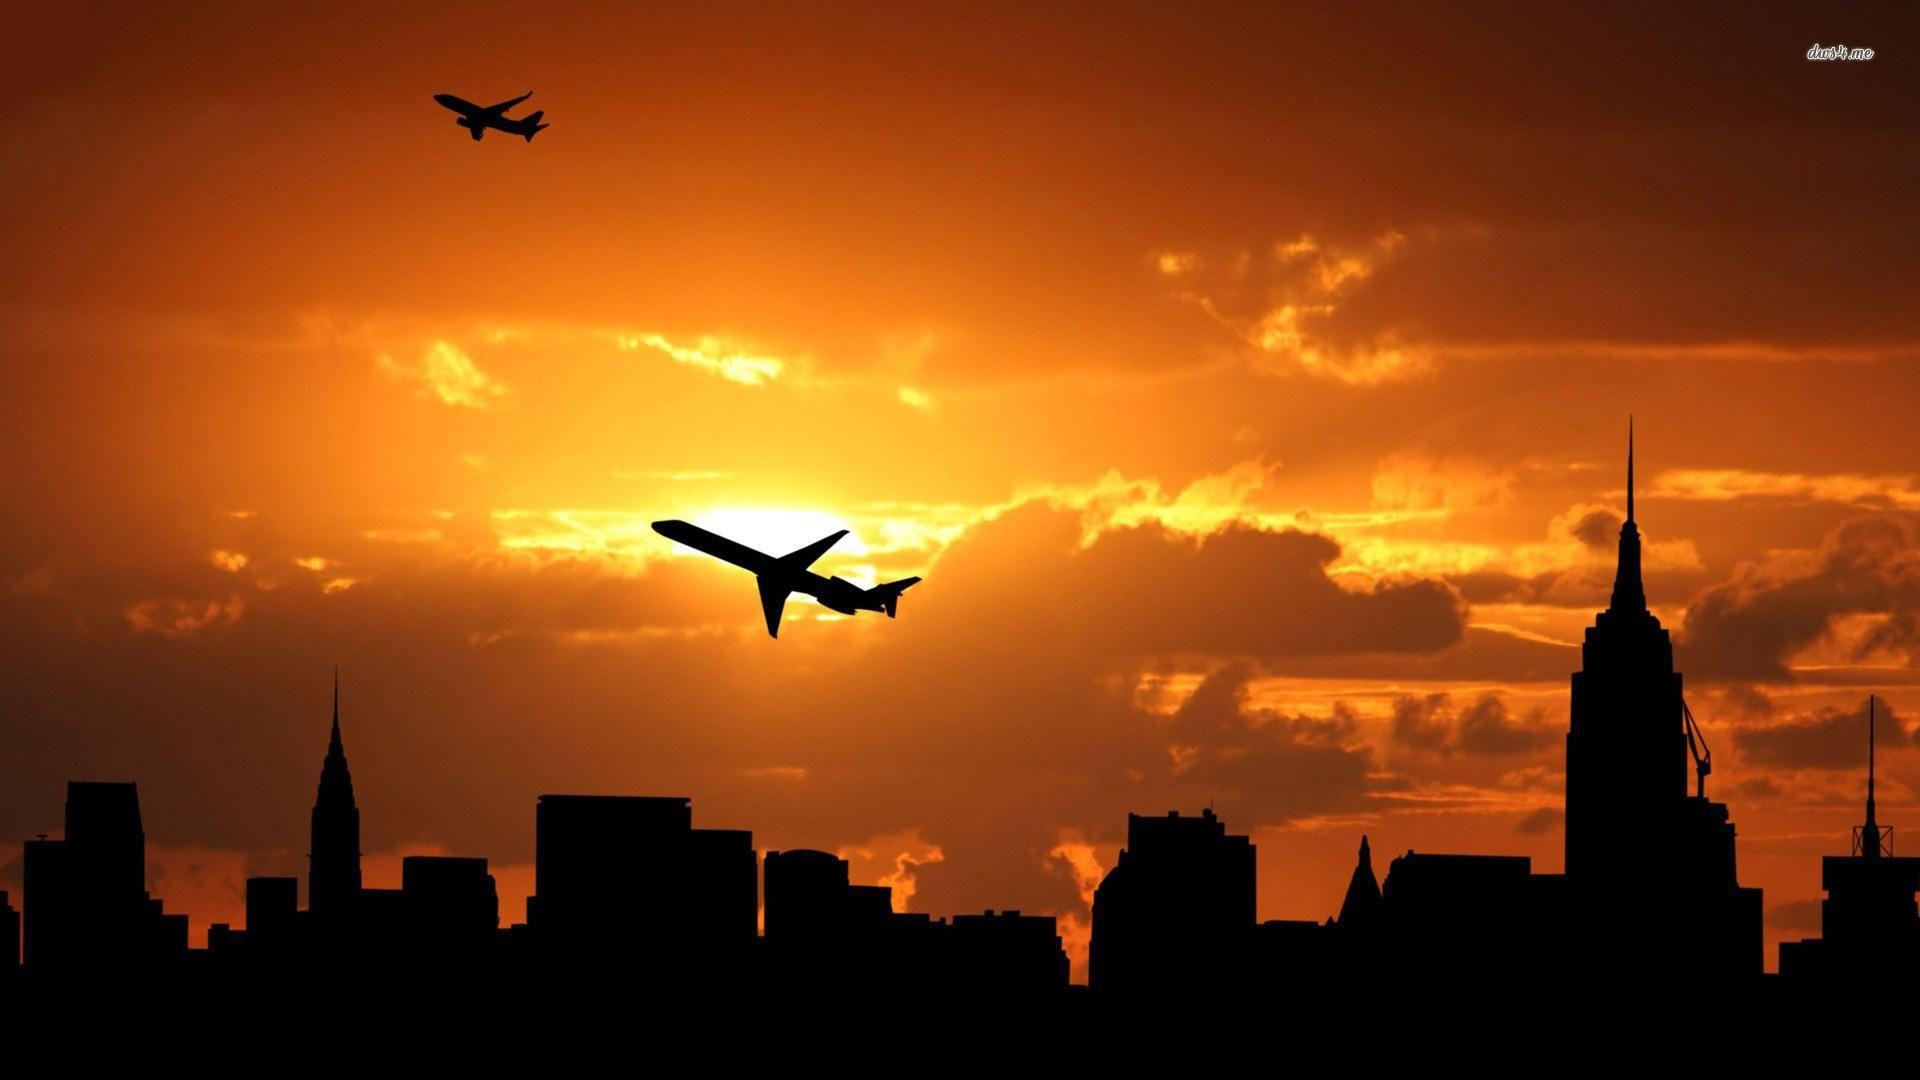 Airplane Sunset Wallpapers - Top Free Airplane Sunset Backgrounds ...